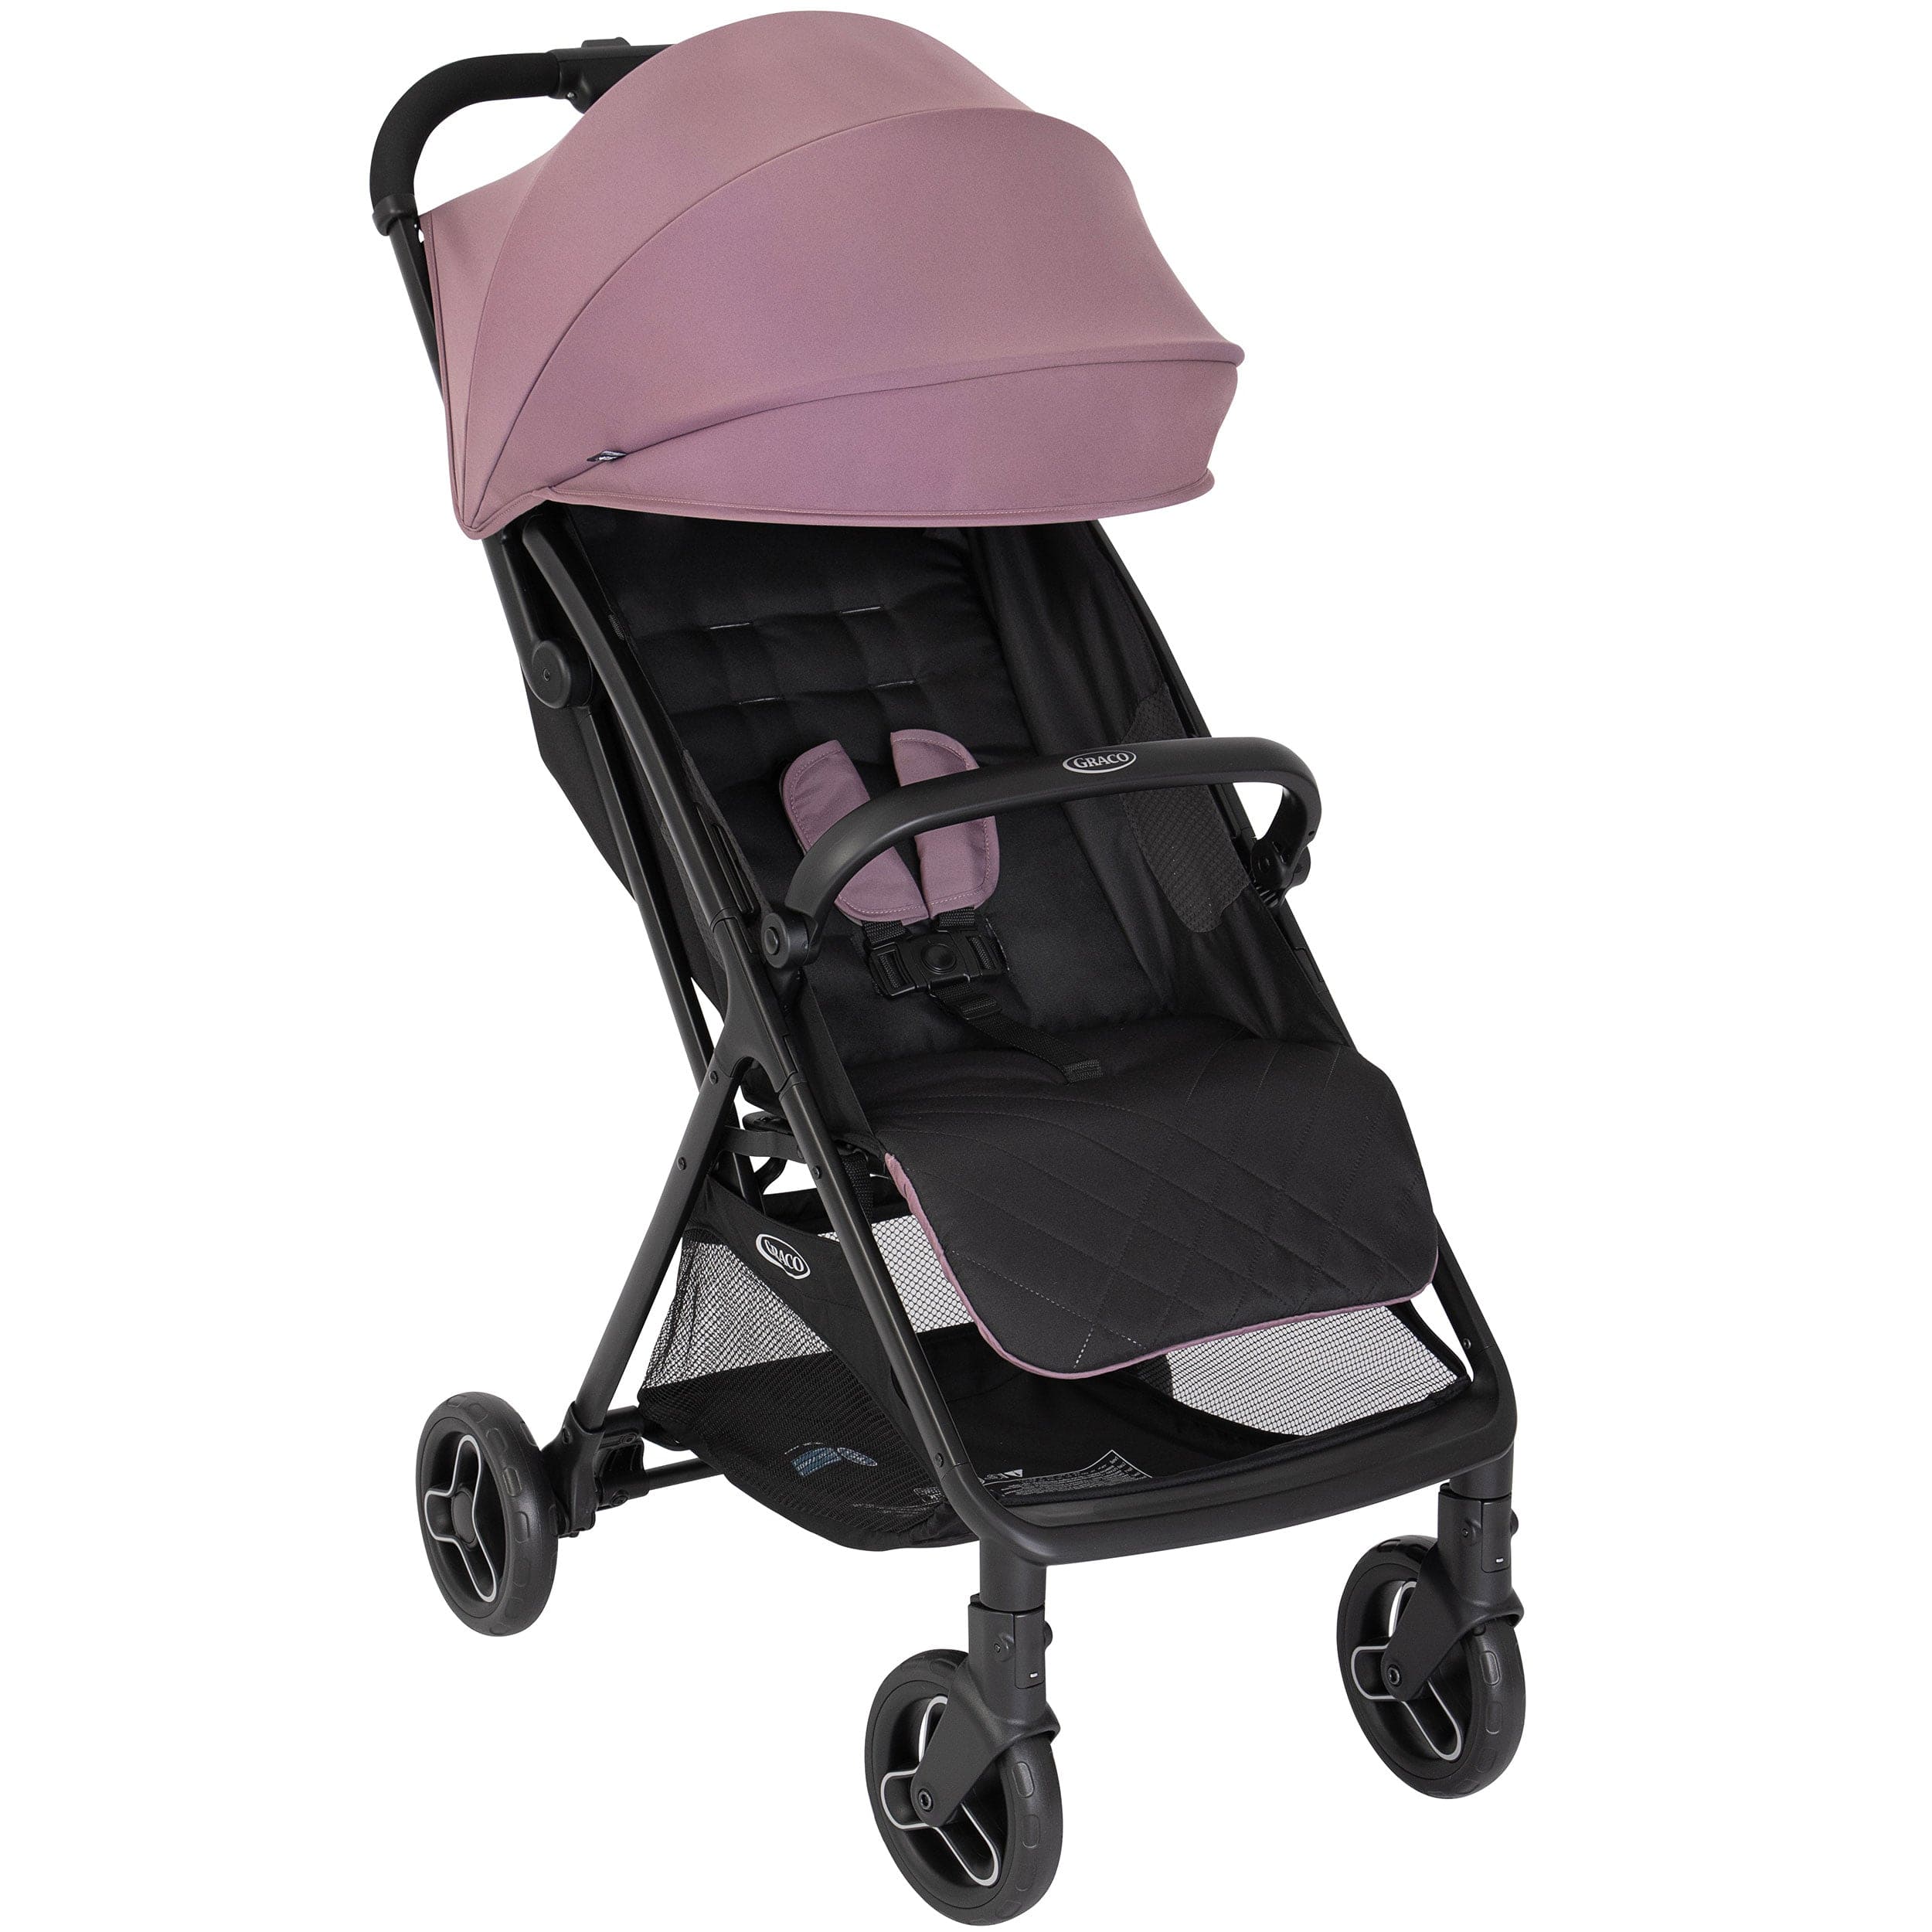 Graco baby pushchairs Graco Myavo Pushchair in Mulberry GS2107AAMBE000